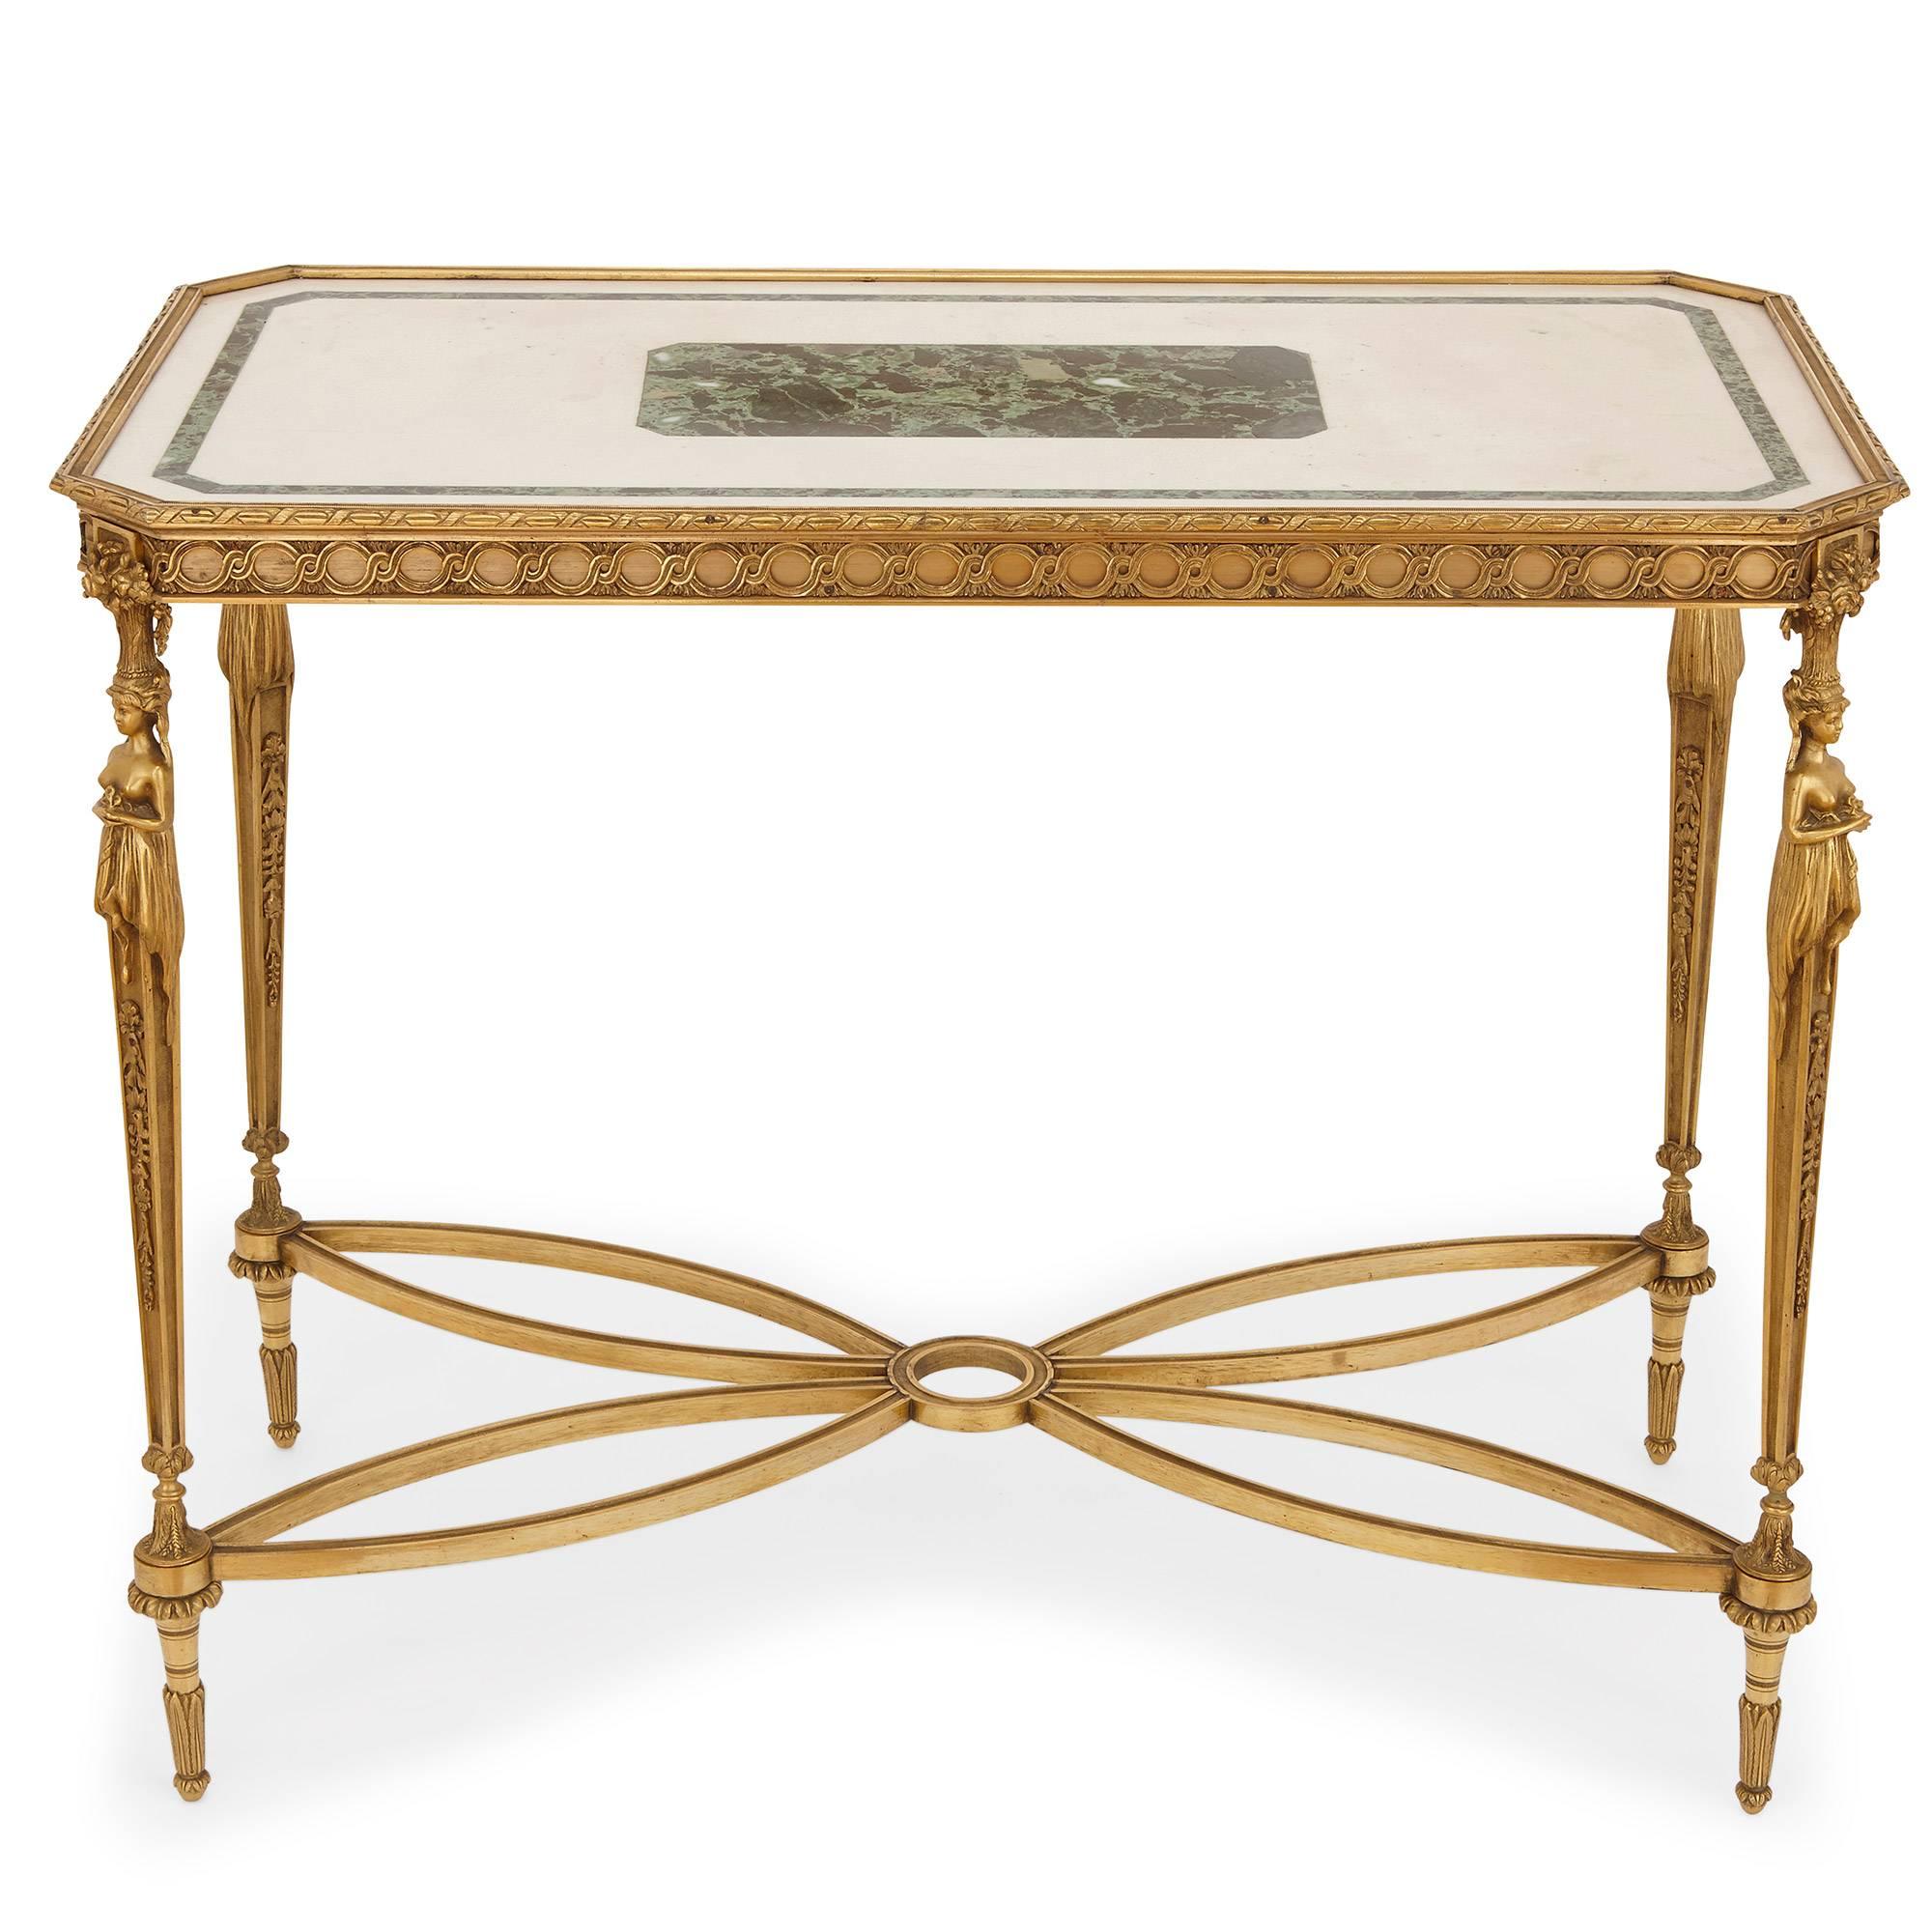 Created in the beautifully elegant Neoclassical style, these fine centre tables are in the manner of prestigious French furniture maker Adam Weisweiler (circa 1750-1810), who was a preeminent French master cabinet maker (ébéniste) in the Louis XVI